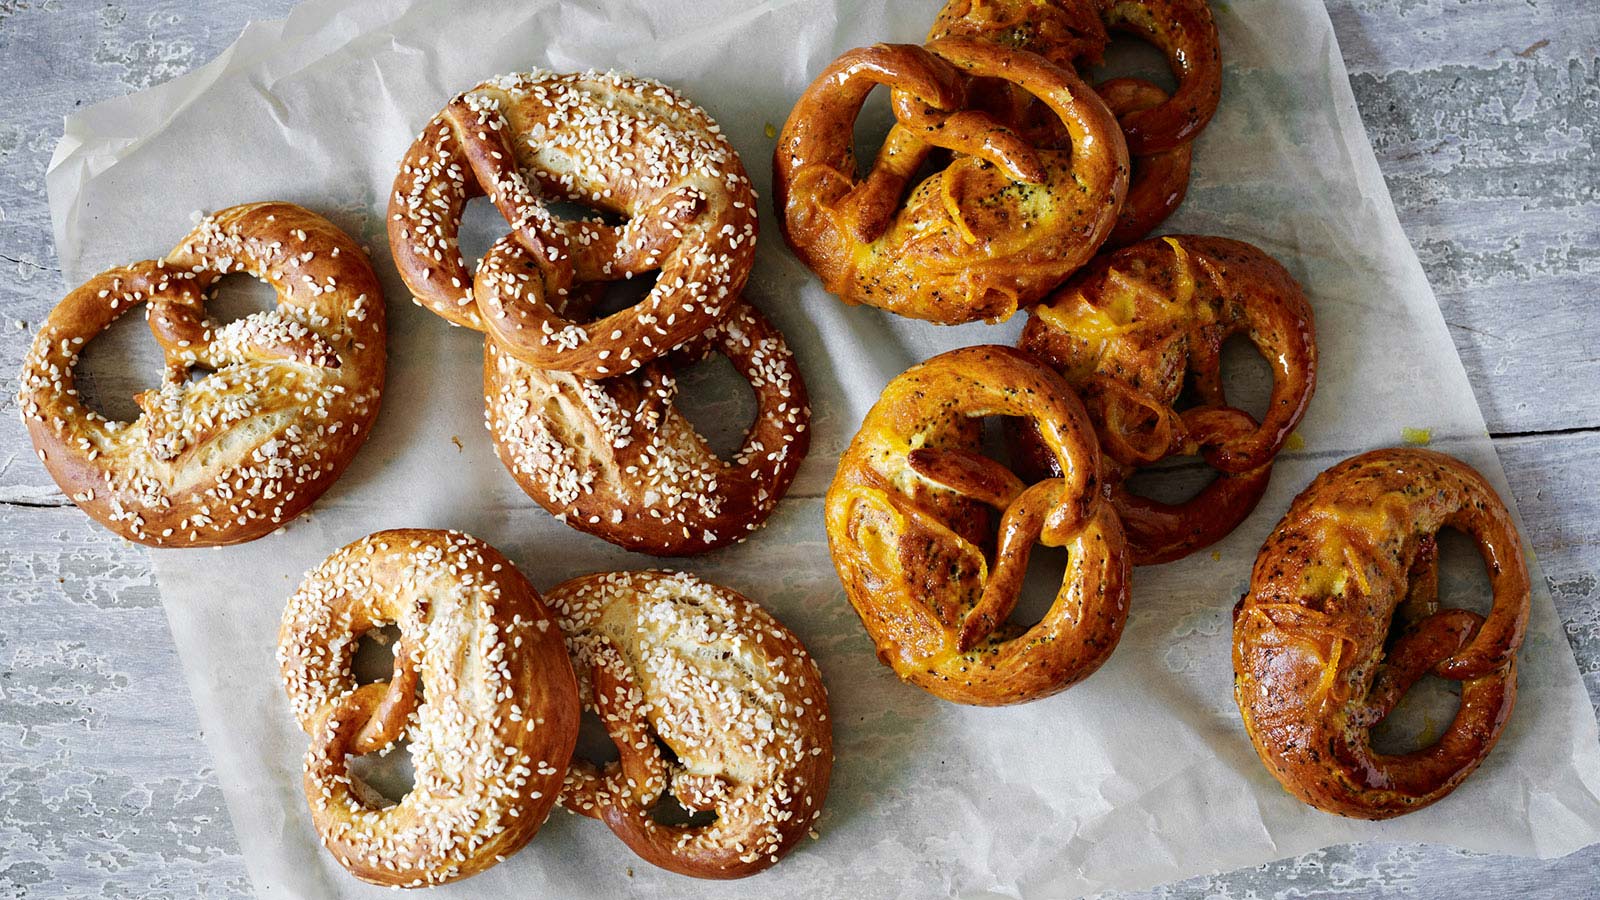 Which Night Animal Are You? Pretzels